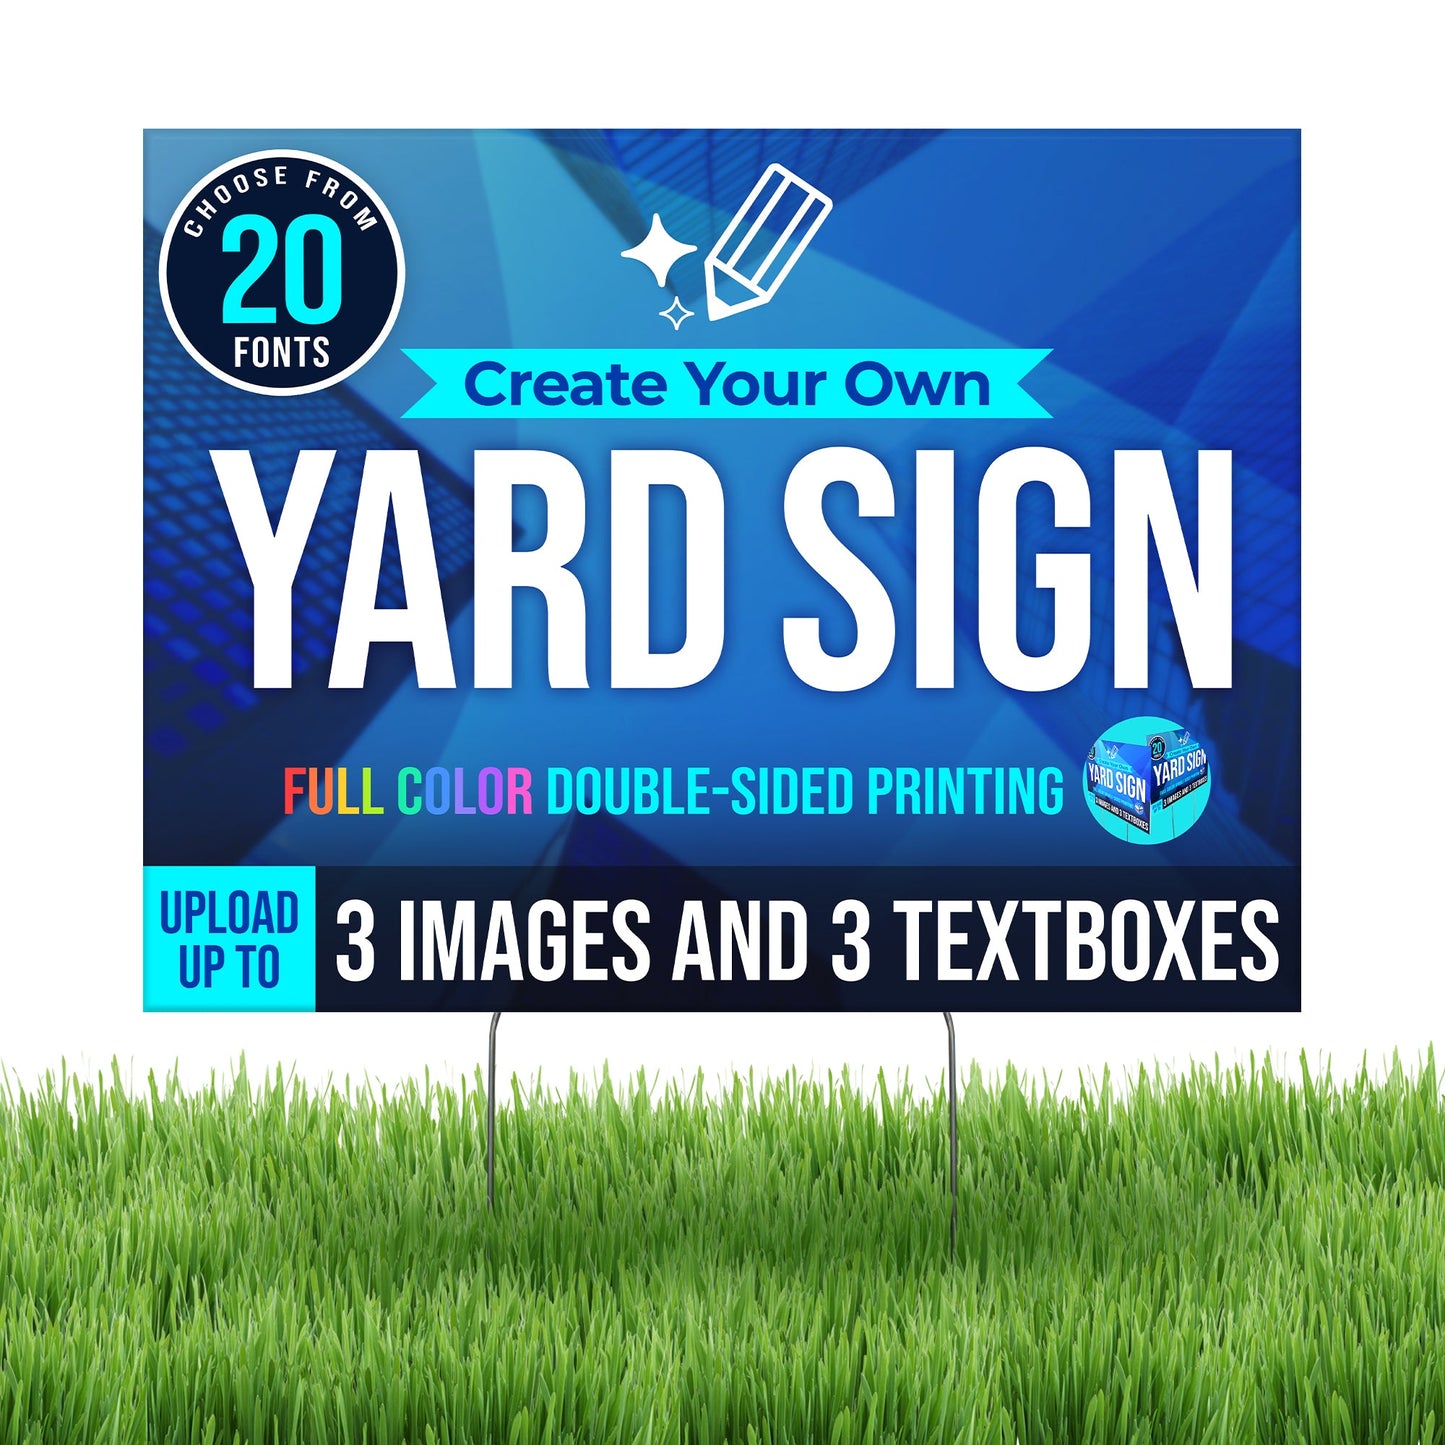 WHOLESALE Personalized Corrugated Plastic Full Color Yard Signs for Outdoors, Home, Office, Business - 24"x18" FOR PICK UP ONLY